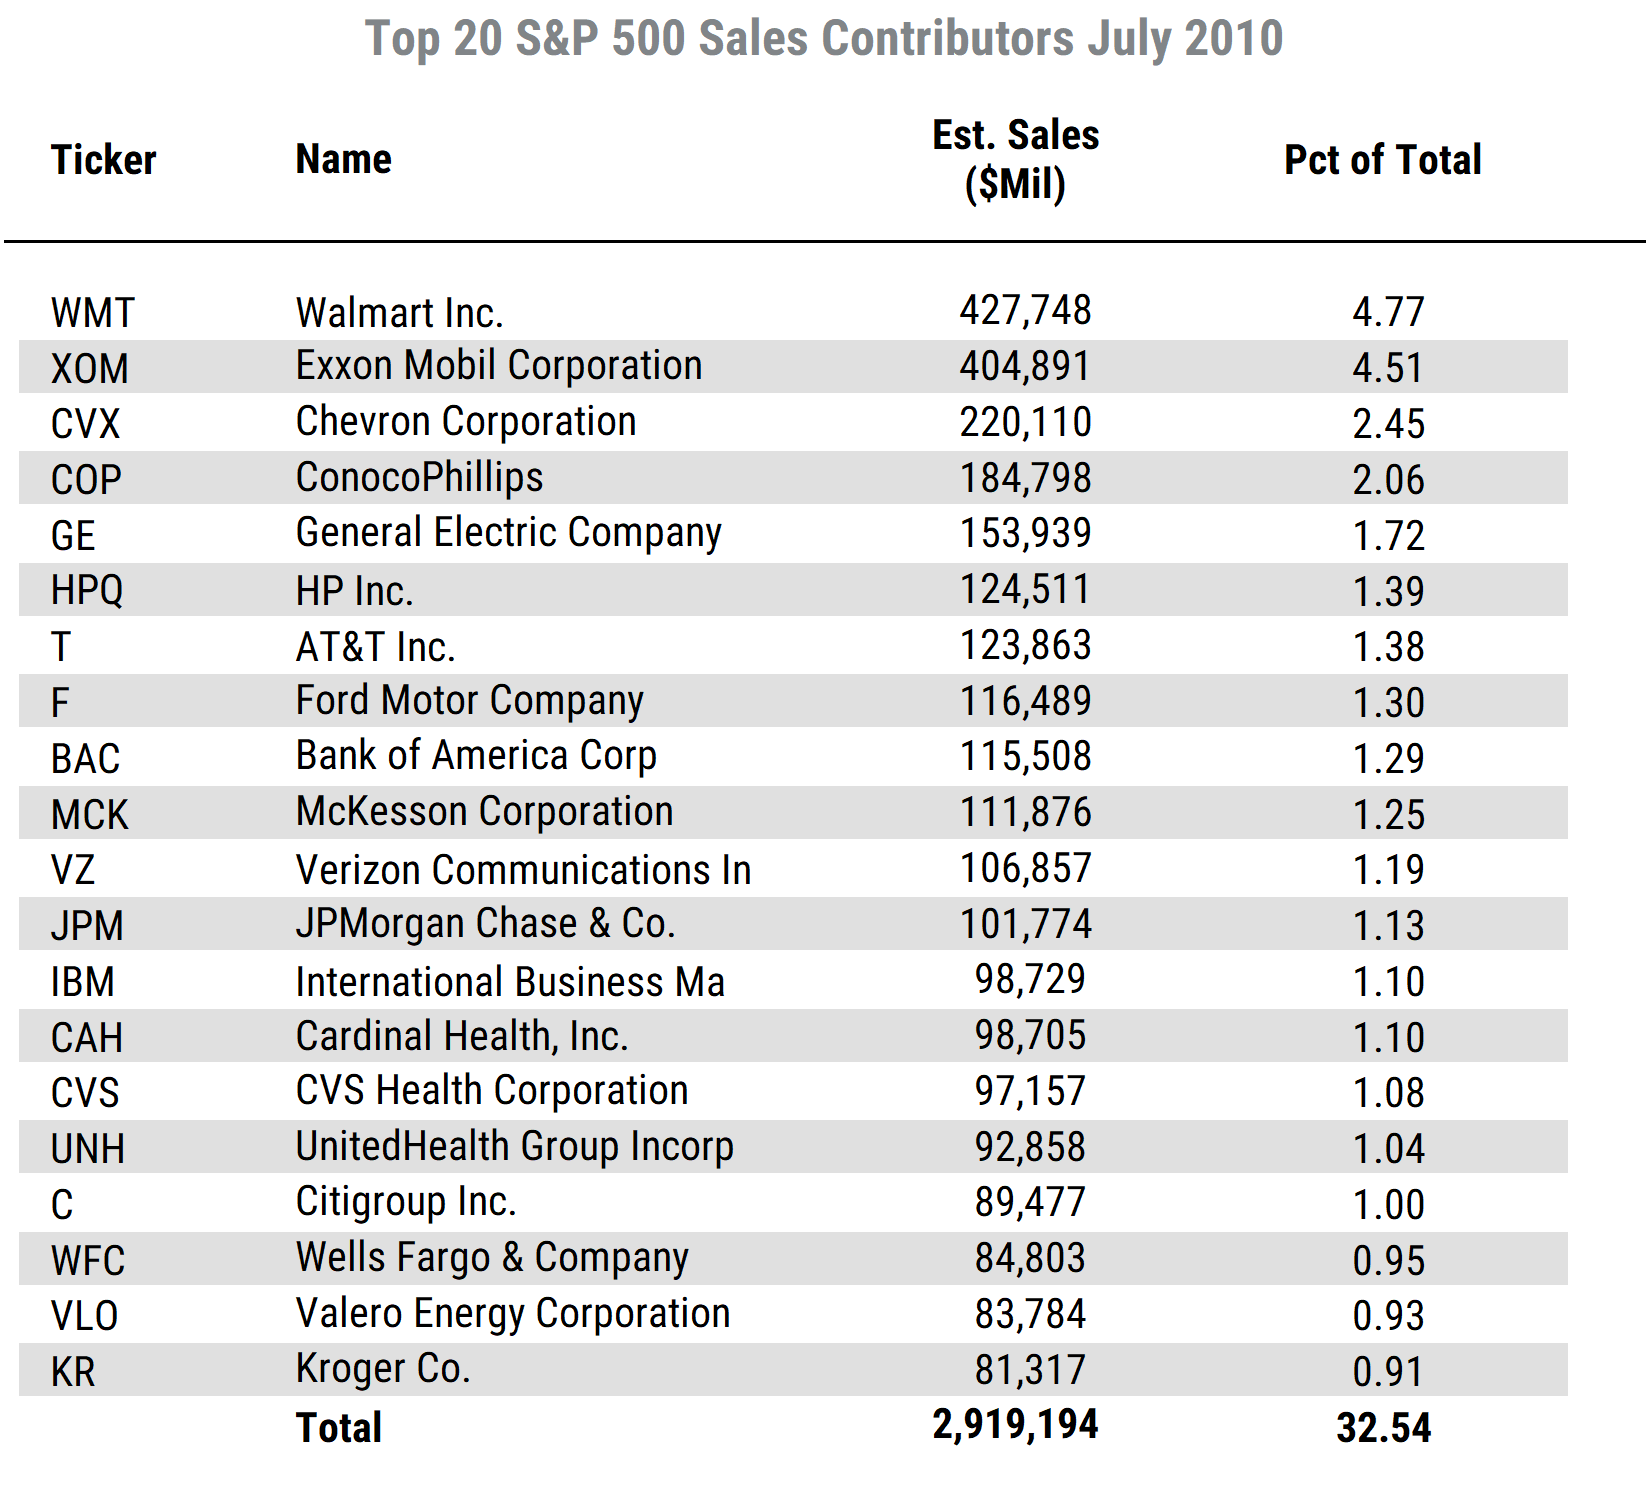 List of Top 20 SP500 Sales 10 yrs Ago